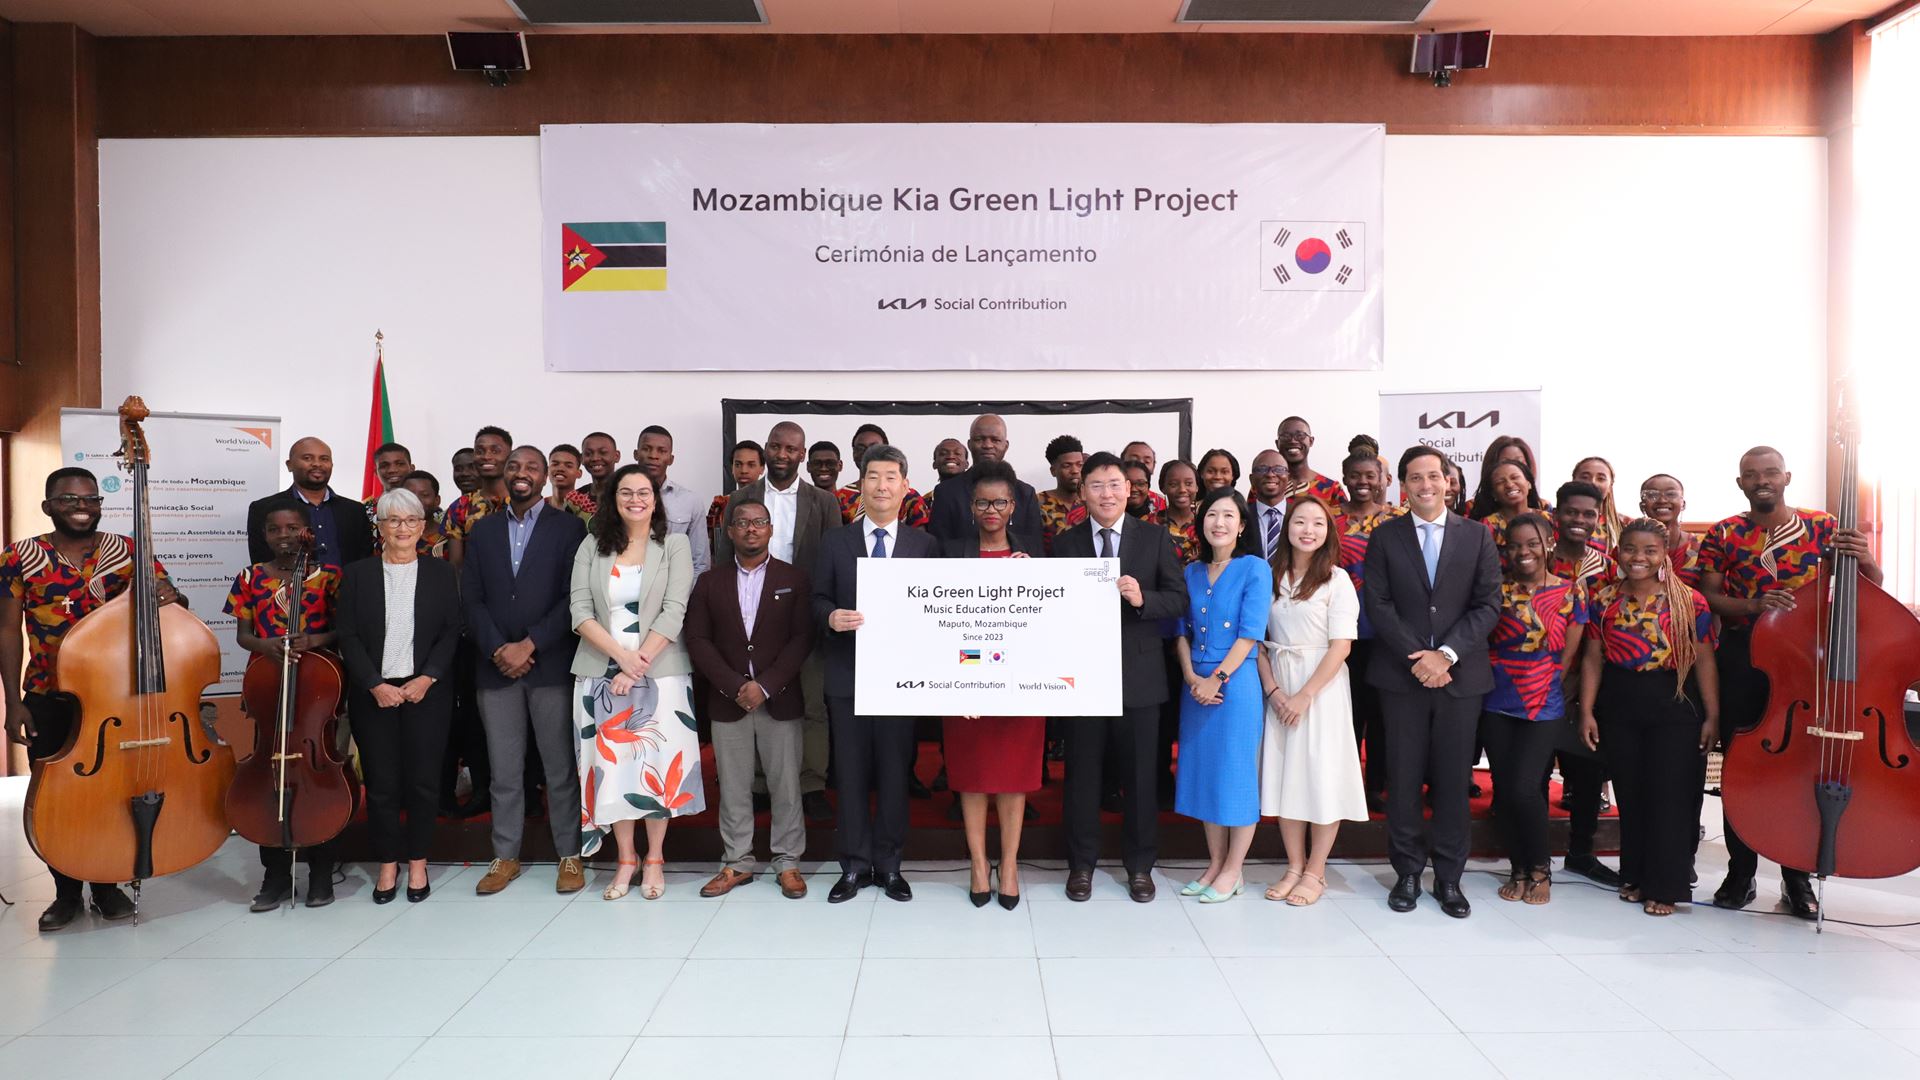 Kia’s Green Light Project to Deliver Life-Enhancing Skills to Communities in Zimbabwe and Mozambique